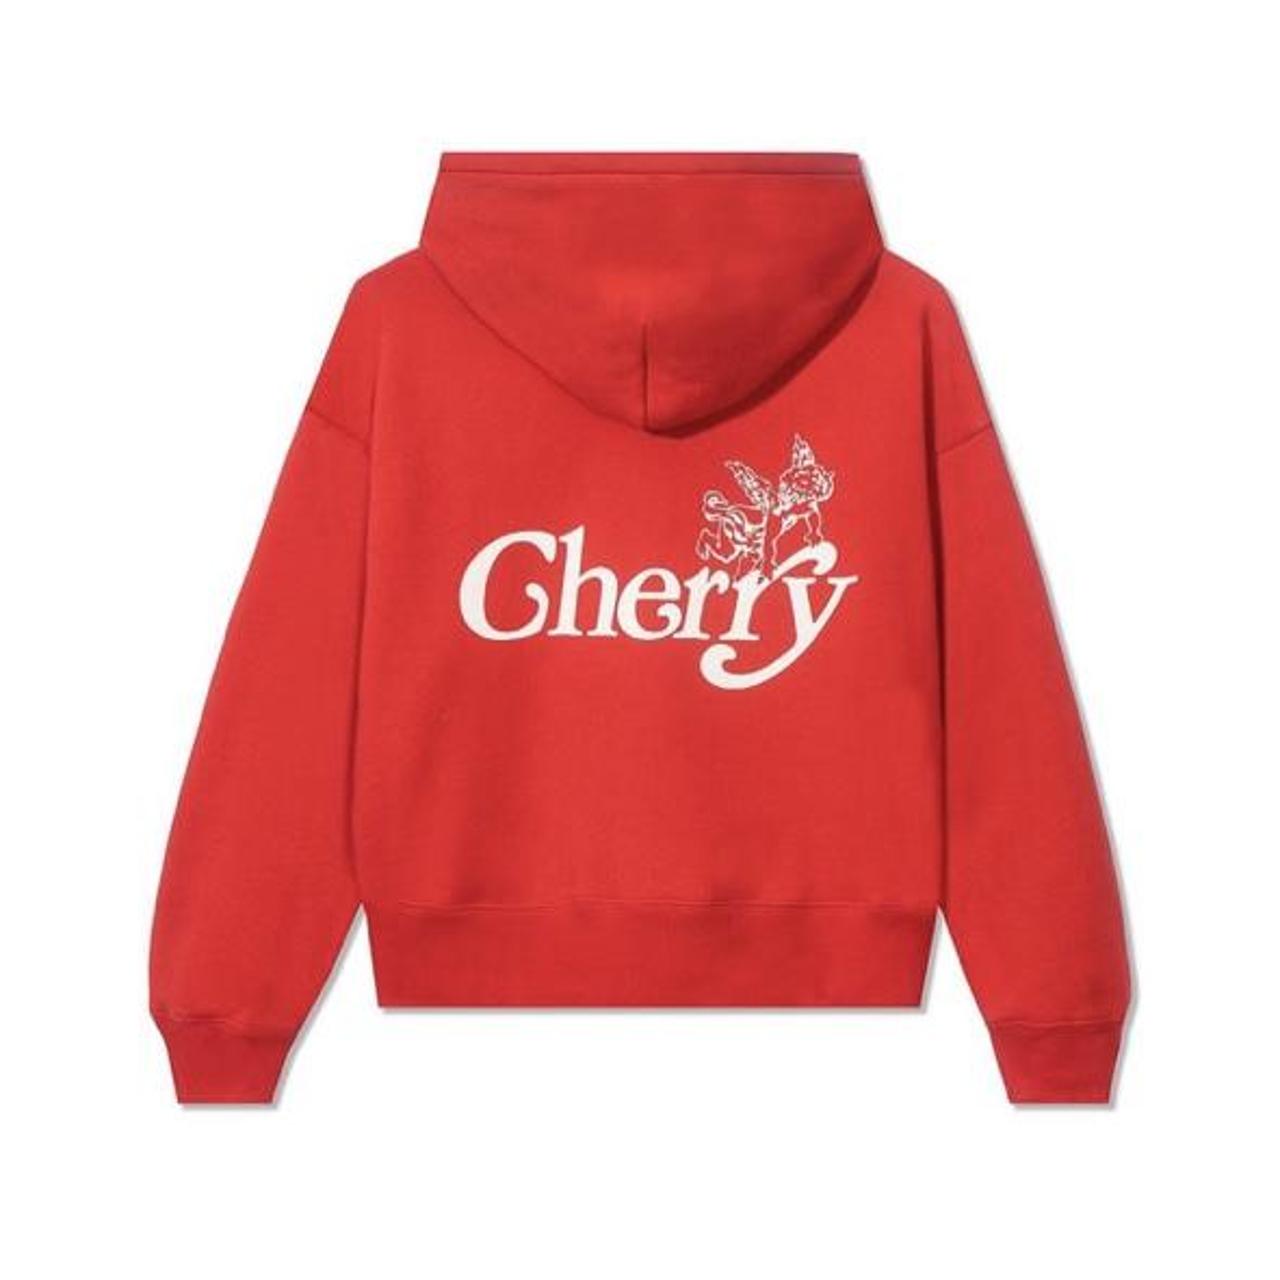 Cherry x girls don’t cry verdy collab reversible...